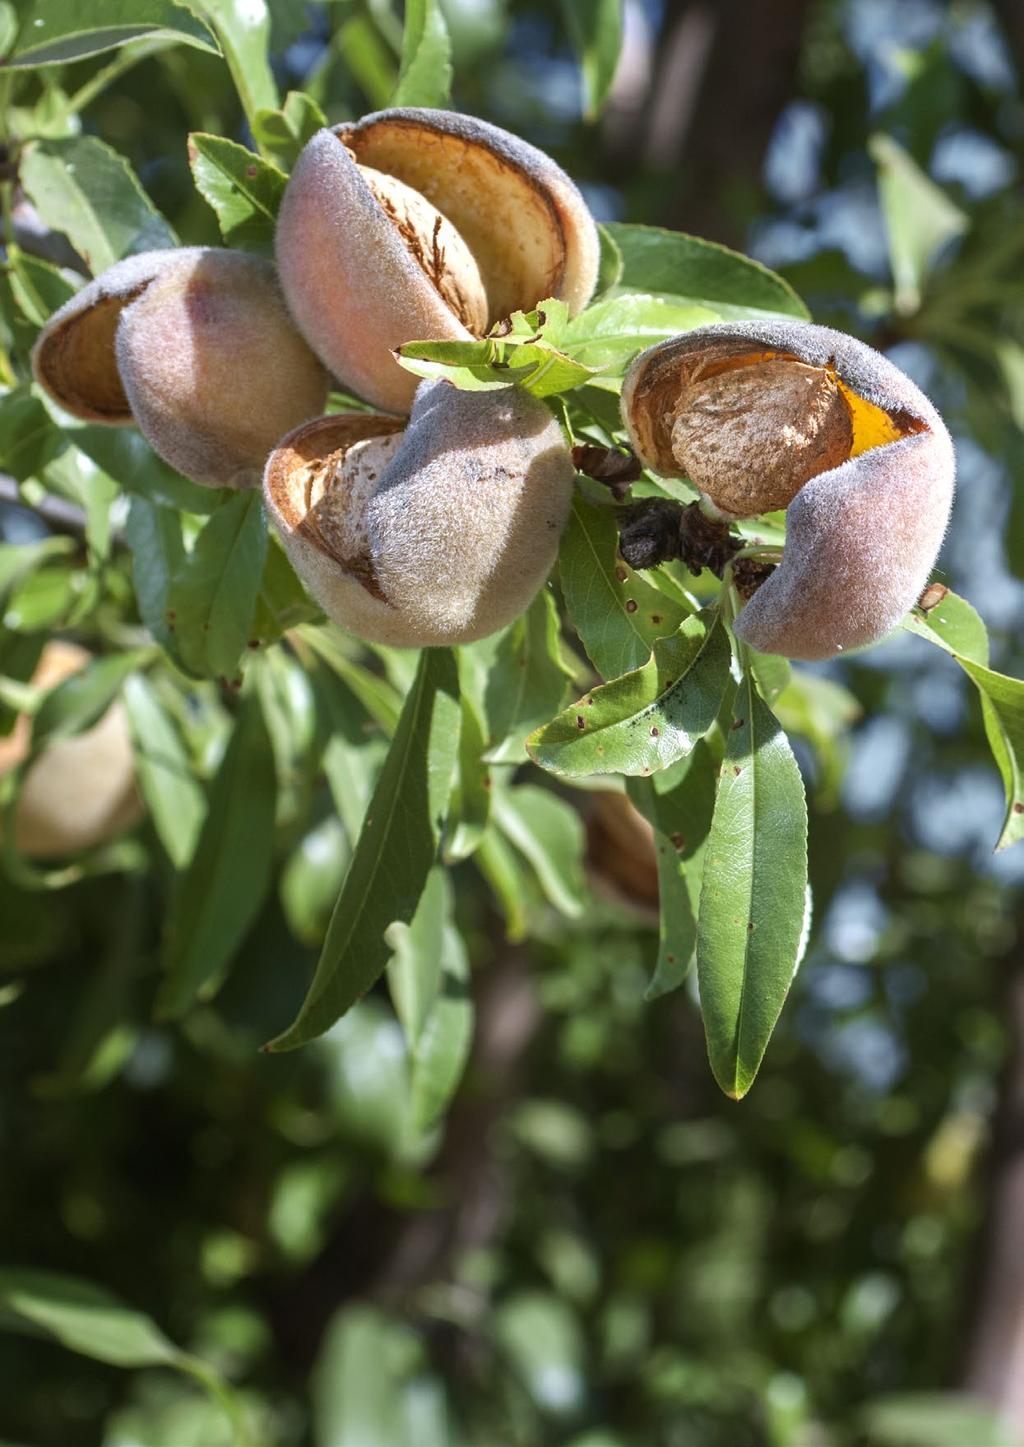 CASE STUDY Almonds One of the main growth commodities in horticulture is almonds. Almond production has seen consistent growth, totalling 82,333 tonnes in 217.